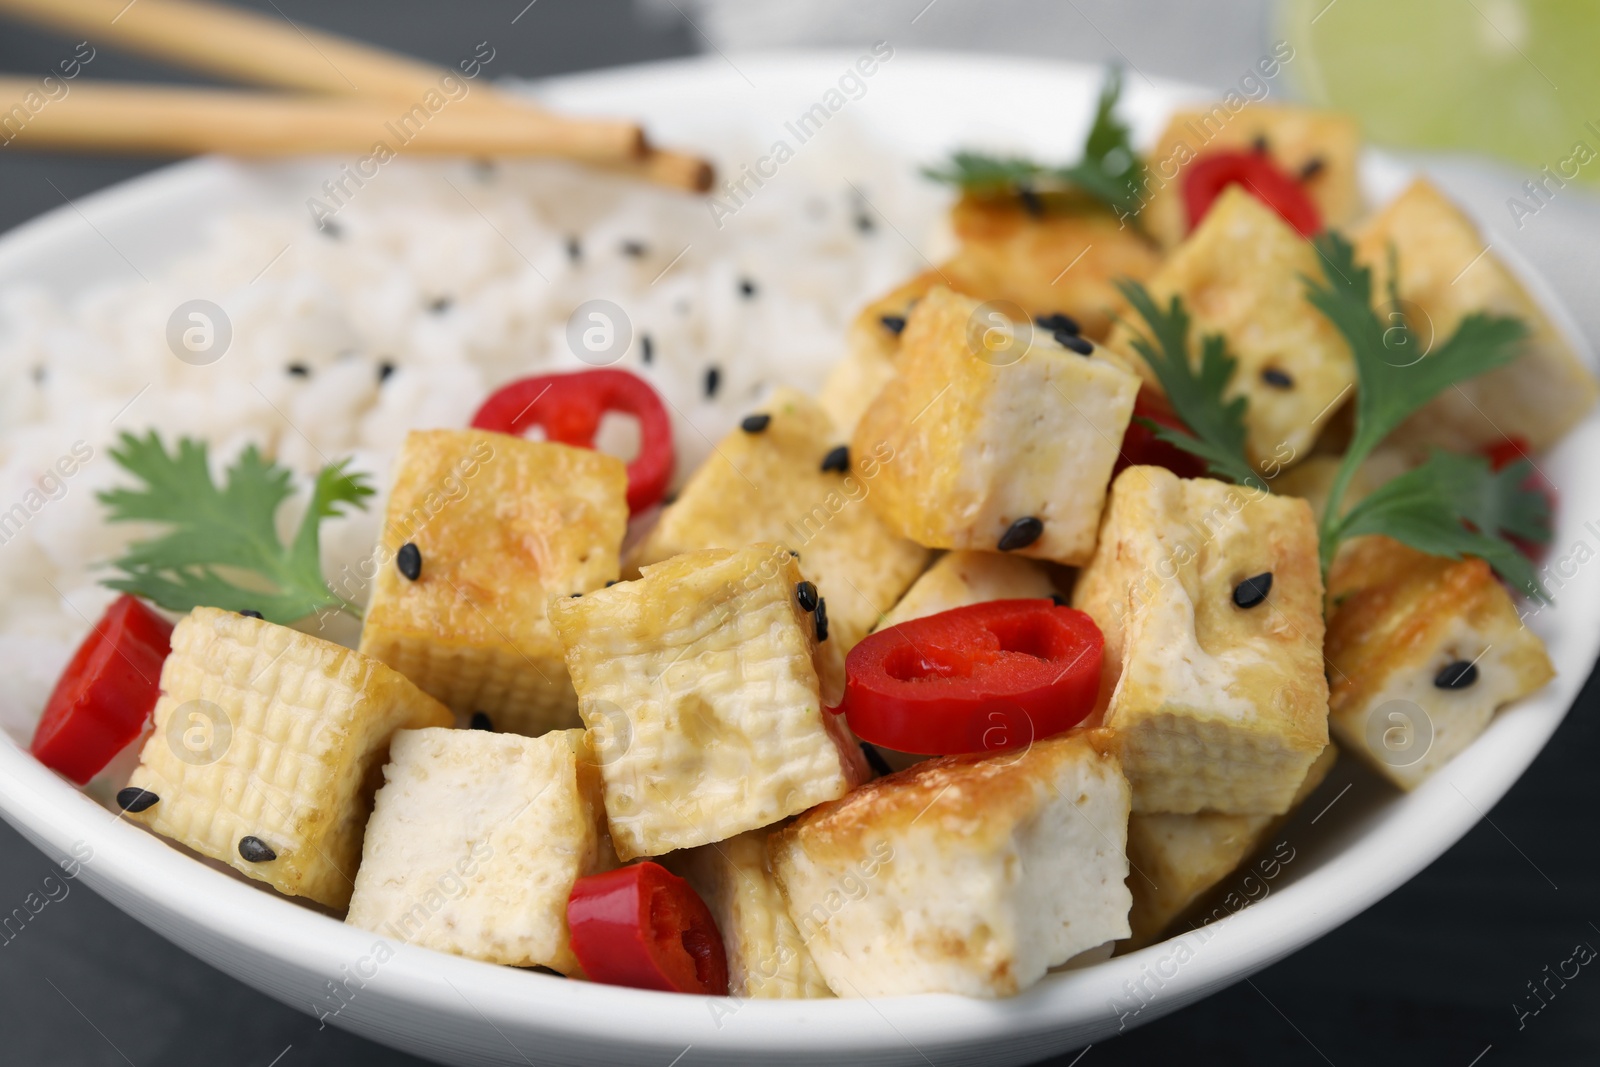 Photo of Bowl with fried tofu, rice, chili pepper and parsley on table, closeup